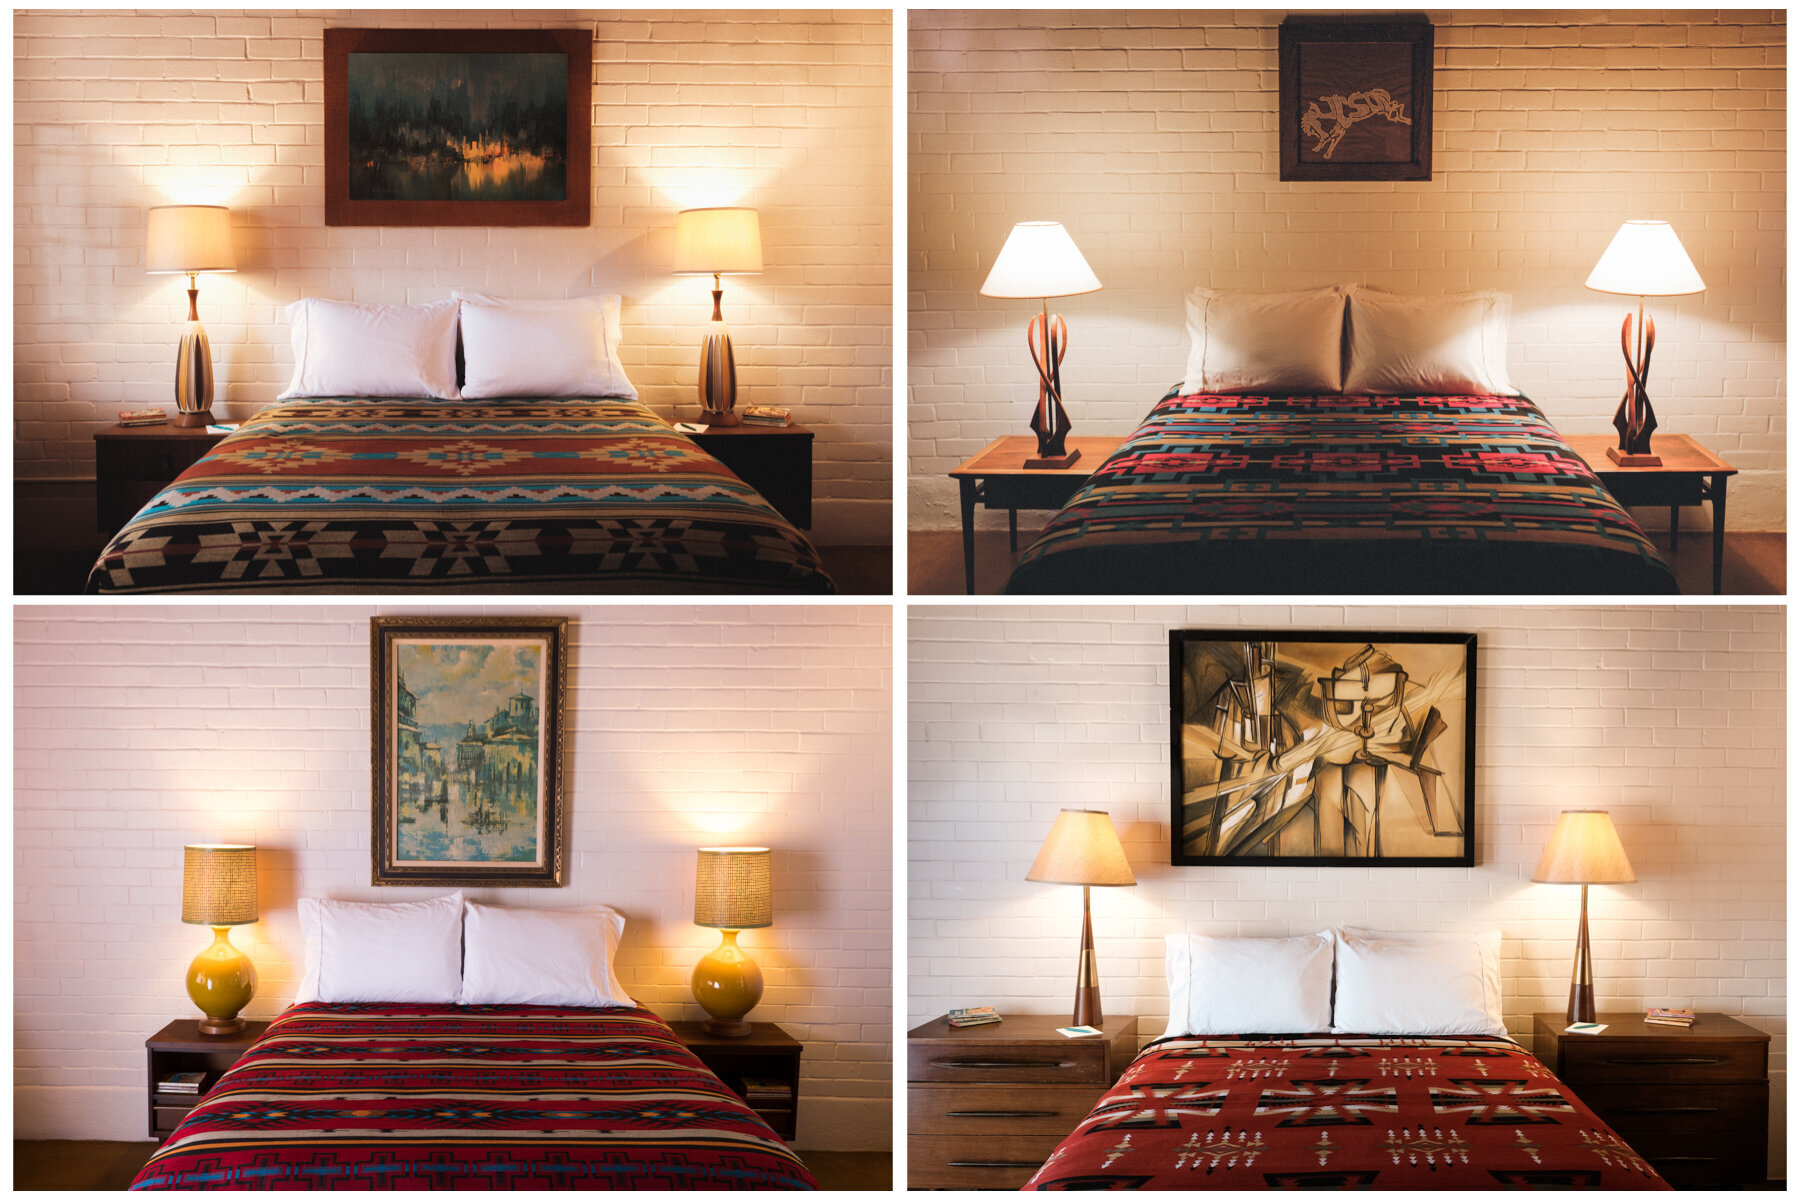 The Bunkhouse bedrooms at The Downtown Clifton image